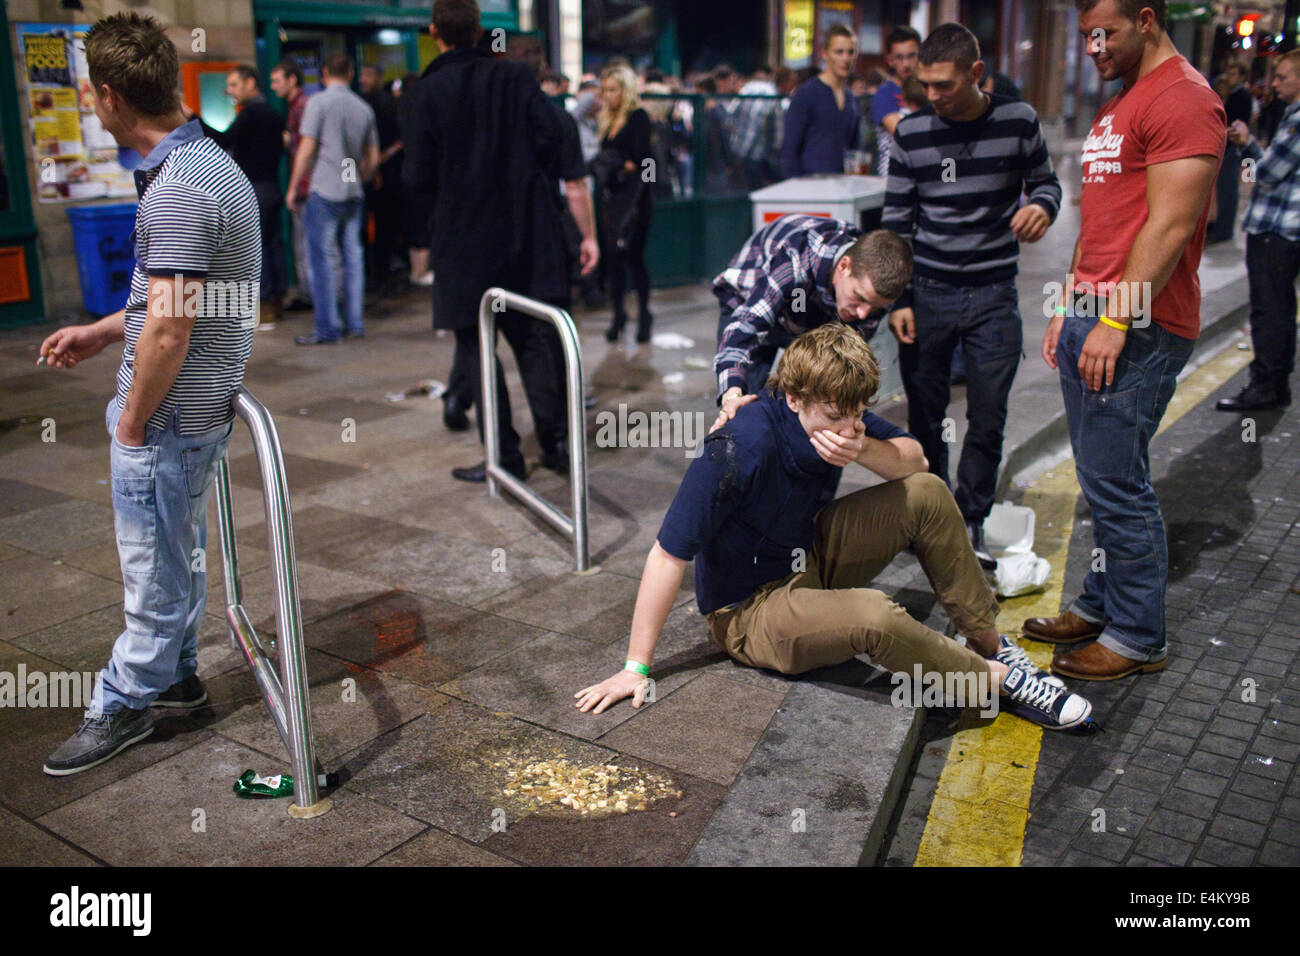 A young man sick in public (after vomiting) on a weekend night out in Cardiff, Wales, UK Stock Photo